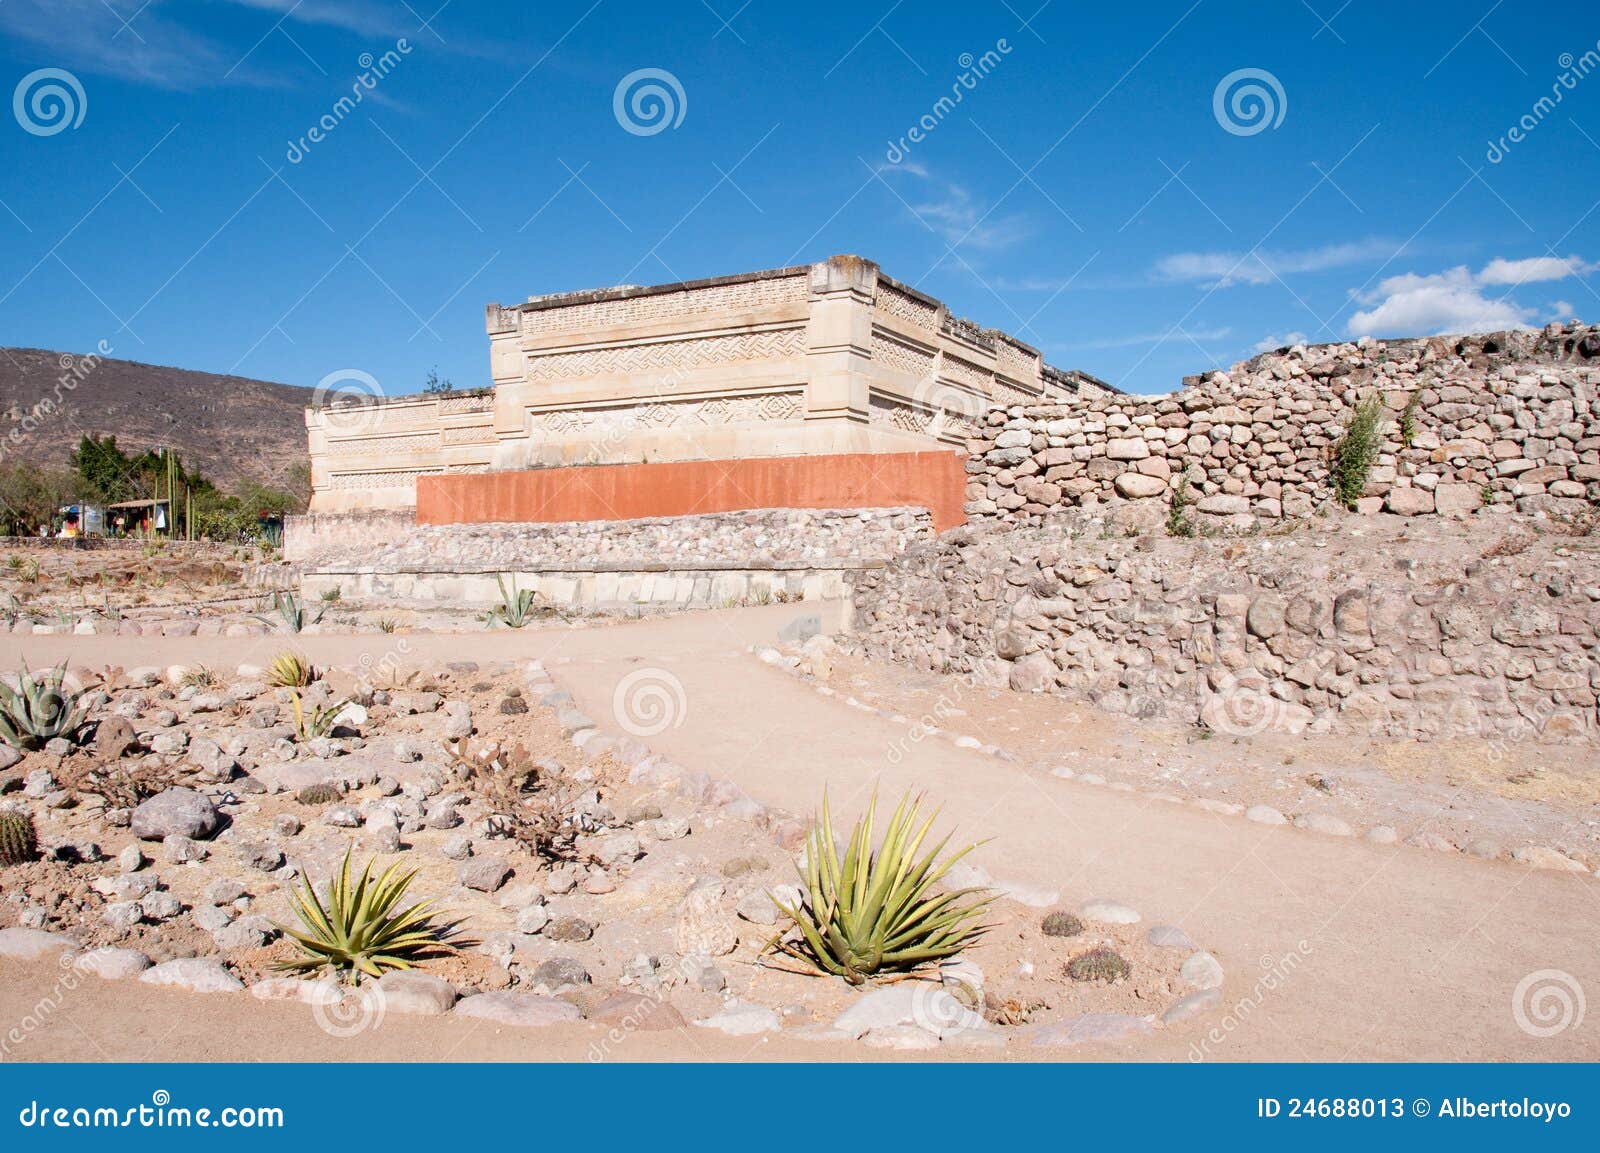 archaeological site of mitla, oaxaca (mexico)